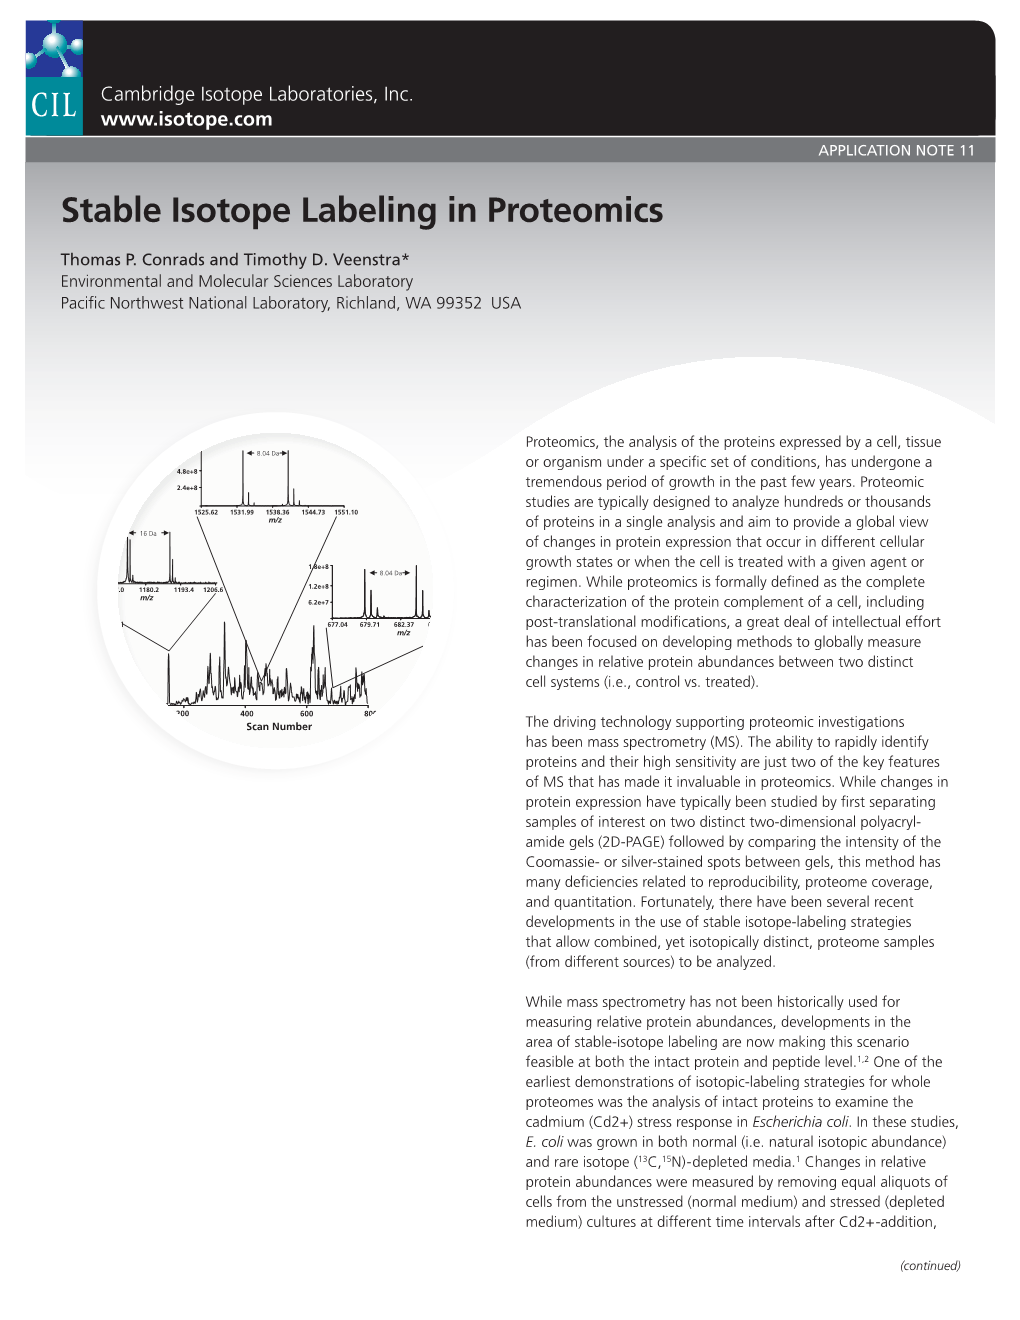 Stable Isotope Labeling in Proteomics